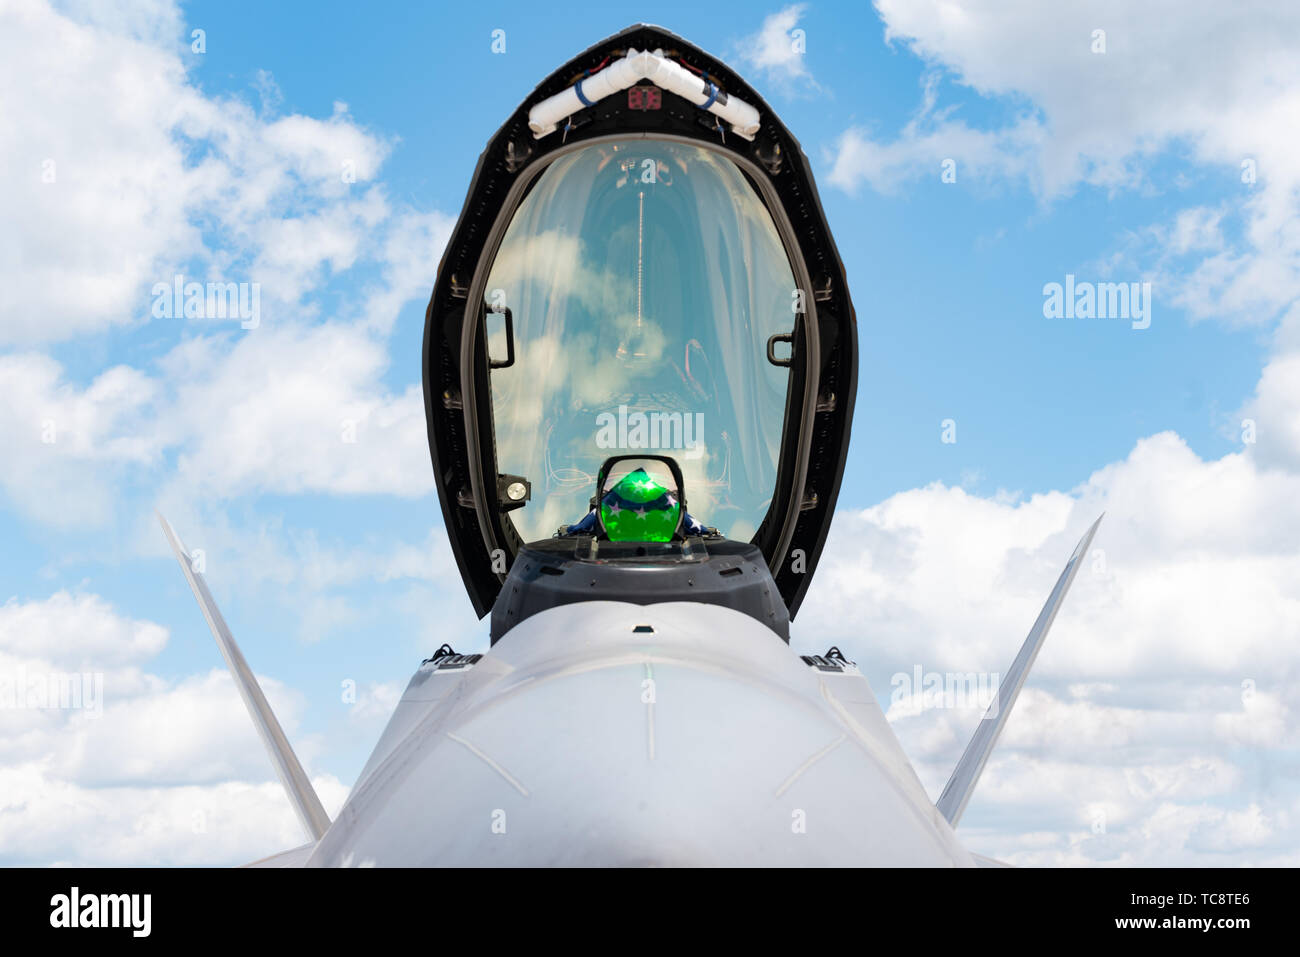 The F-22 Raptor sits on display before a performance in Beaufort, S.C., April 27, 2019. Representing the U.S. Air Force and Air Combat Command, the F-22 Demo Team travels to over 20 air shows a season showcasing the performance and capabilities of the F-22 Raptor. (U.S. Air Force photo by 2nd Lt. Samuel Eckholm) Stock Photo